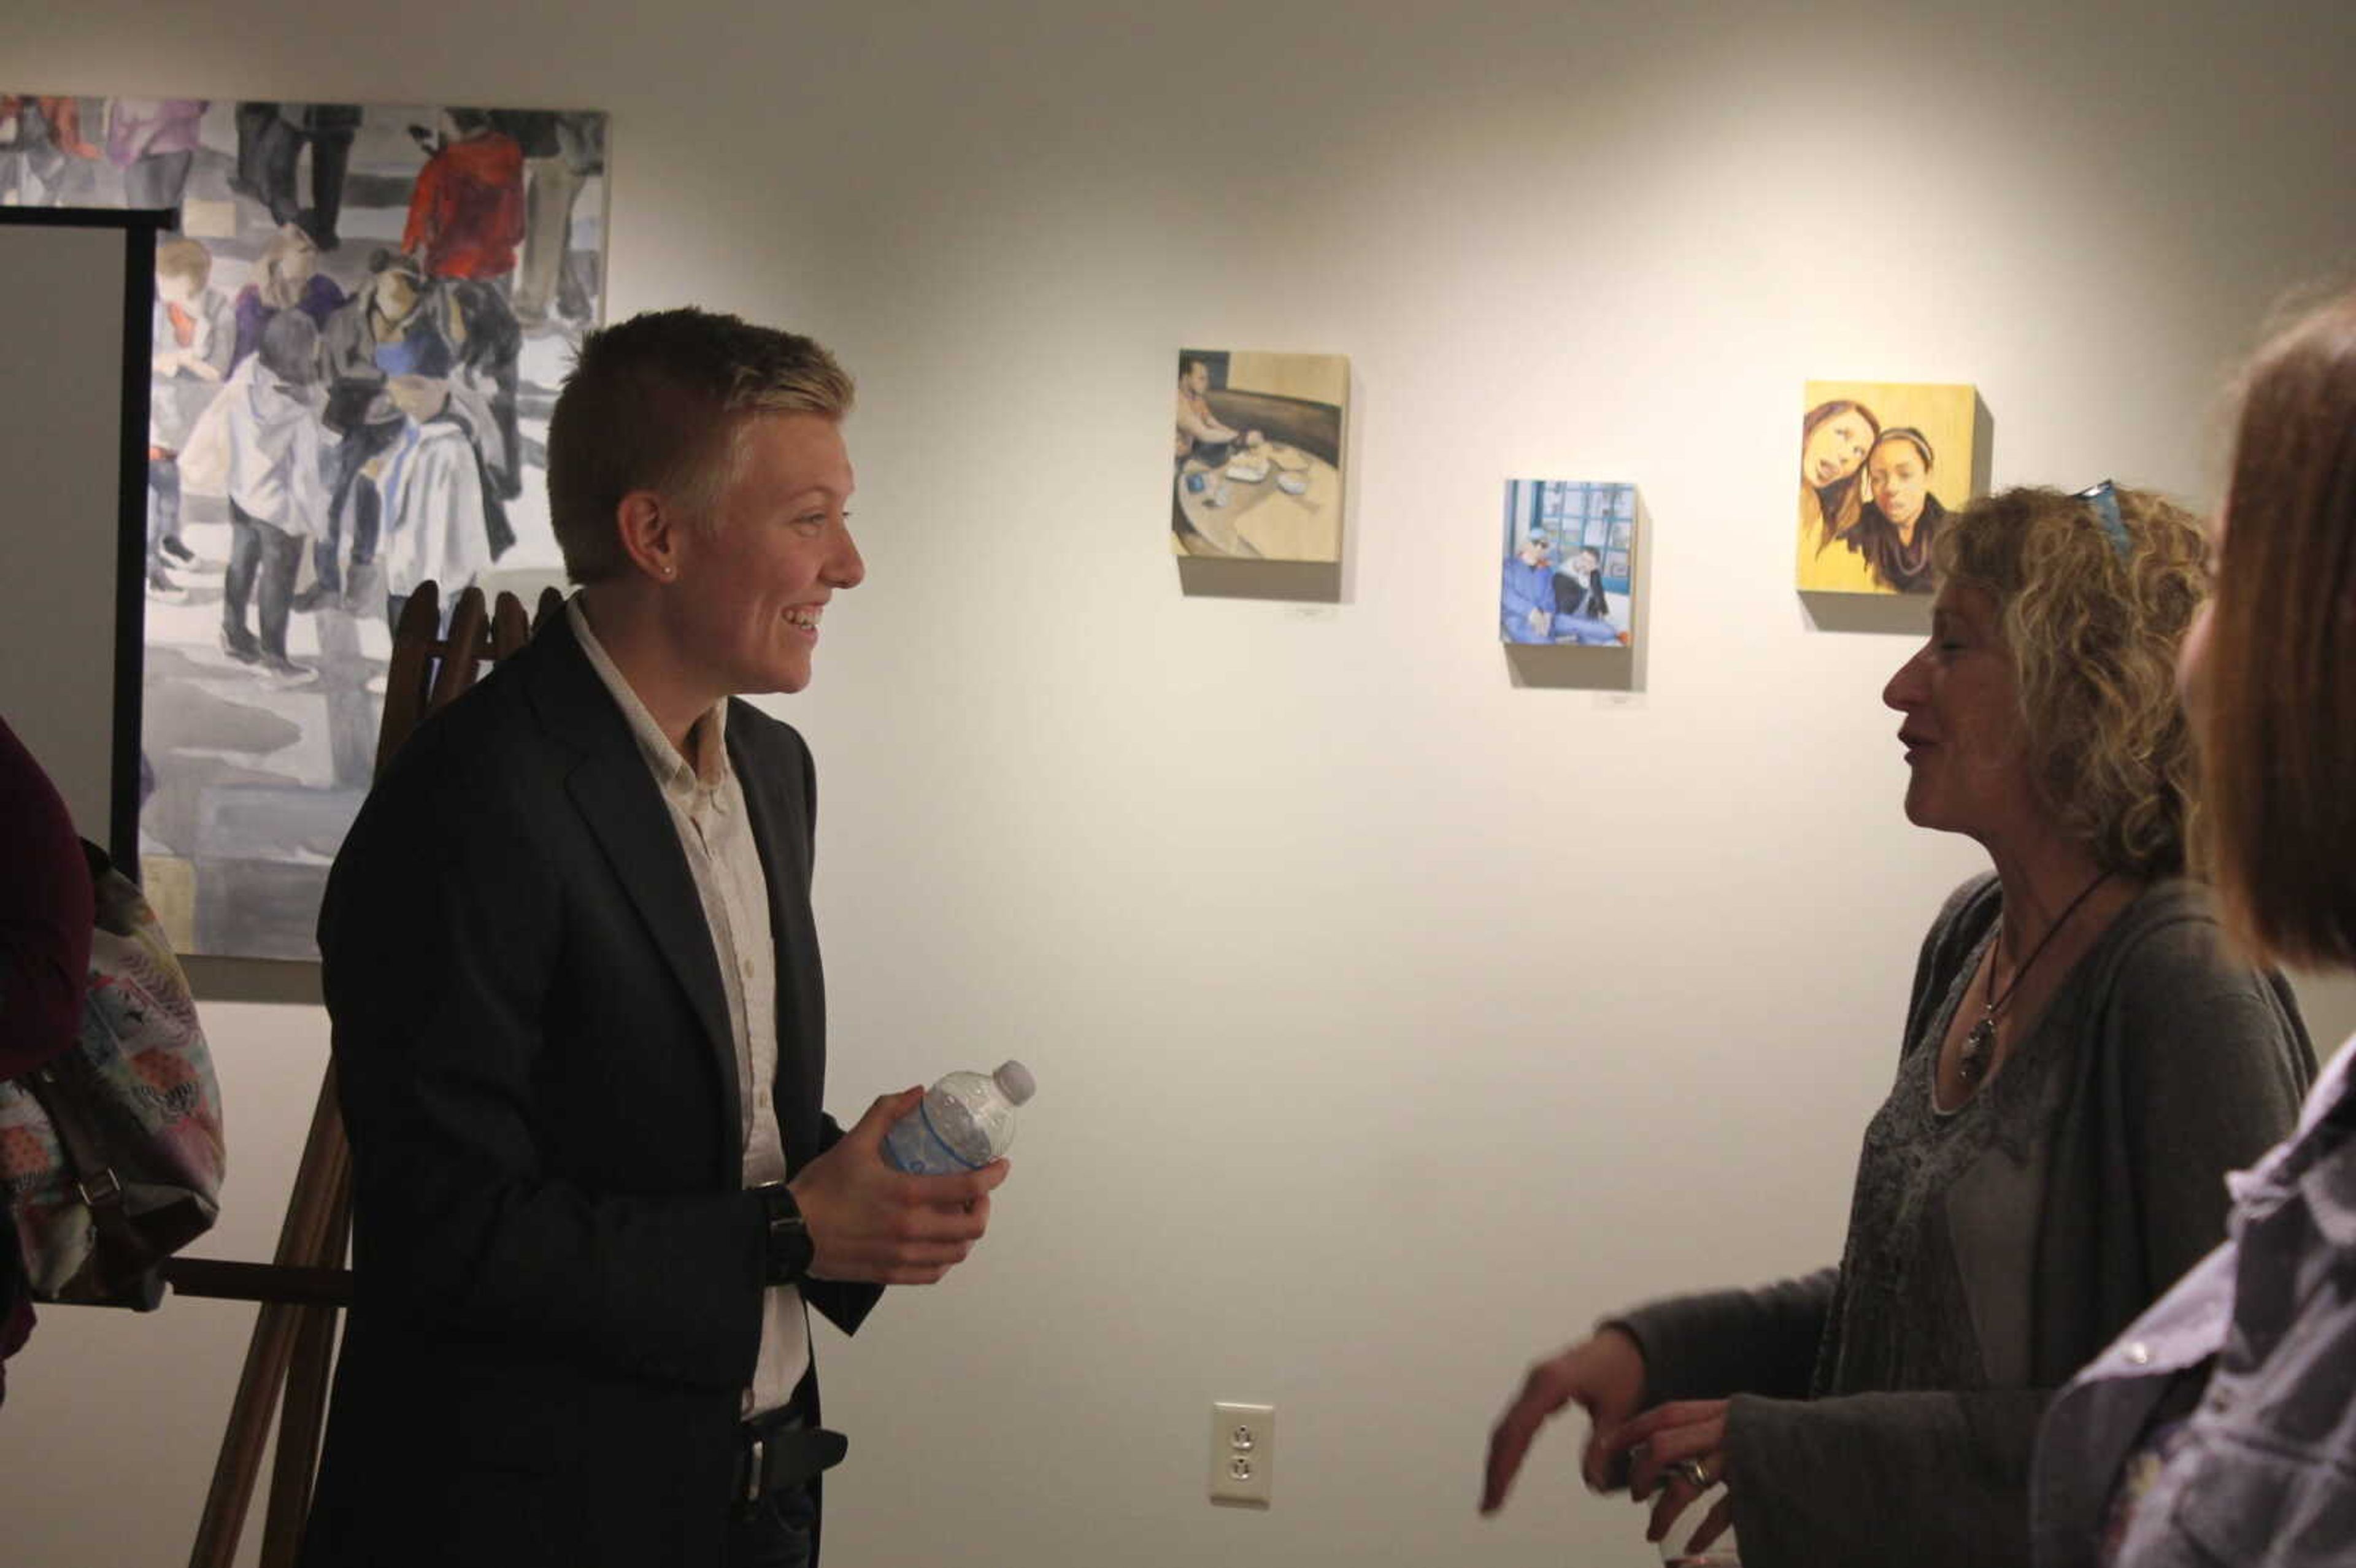 Rane Belling talking with audience members after the "Breaking the Binary" event.